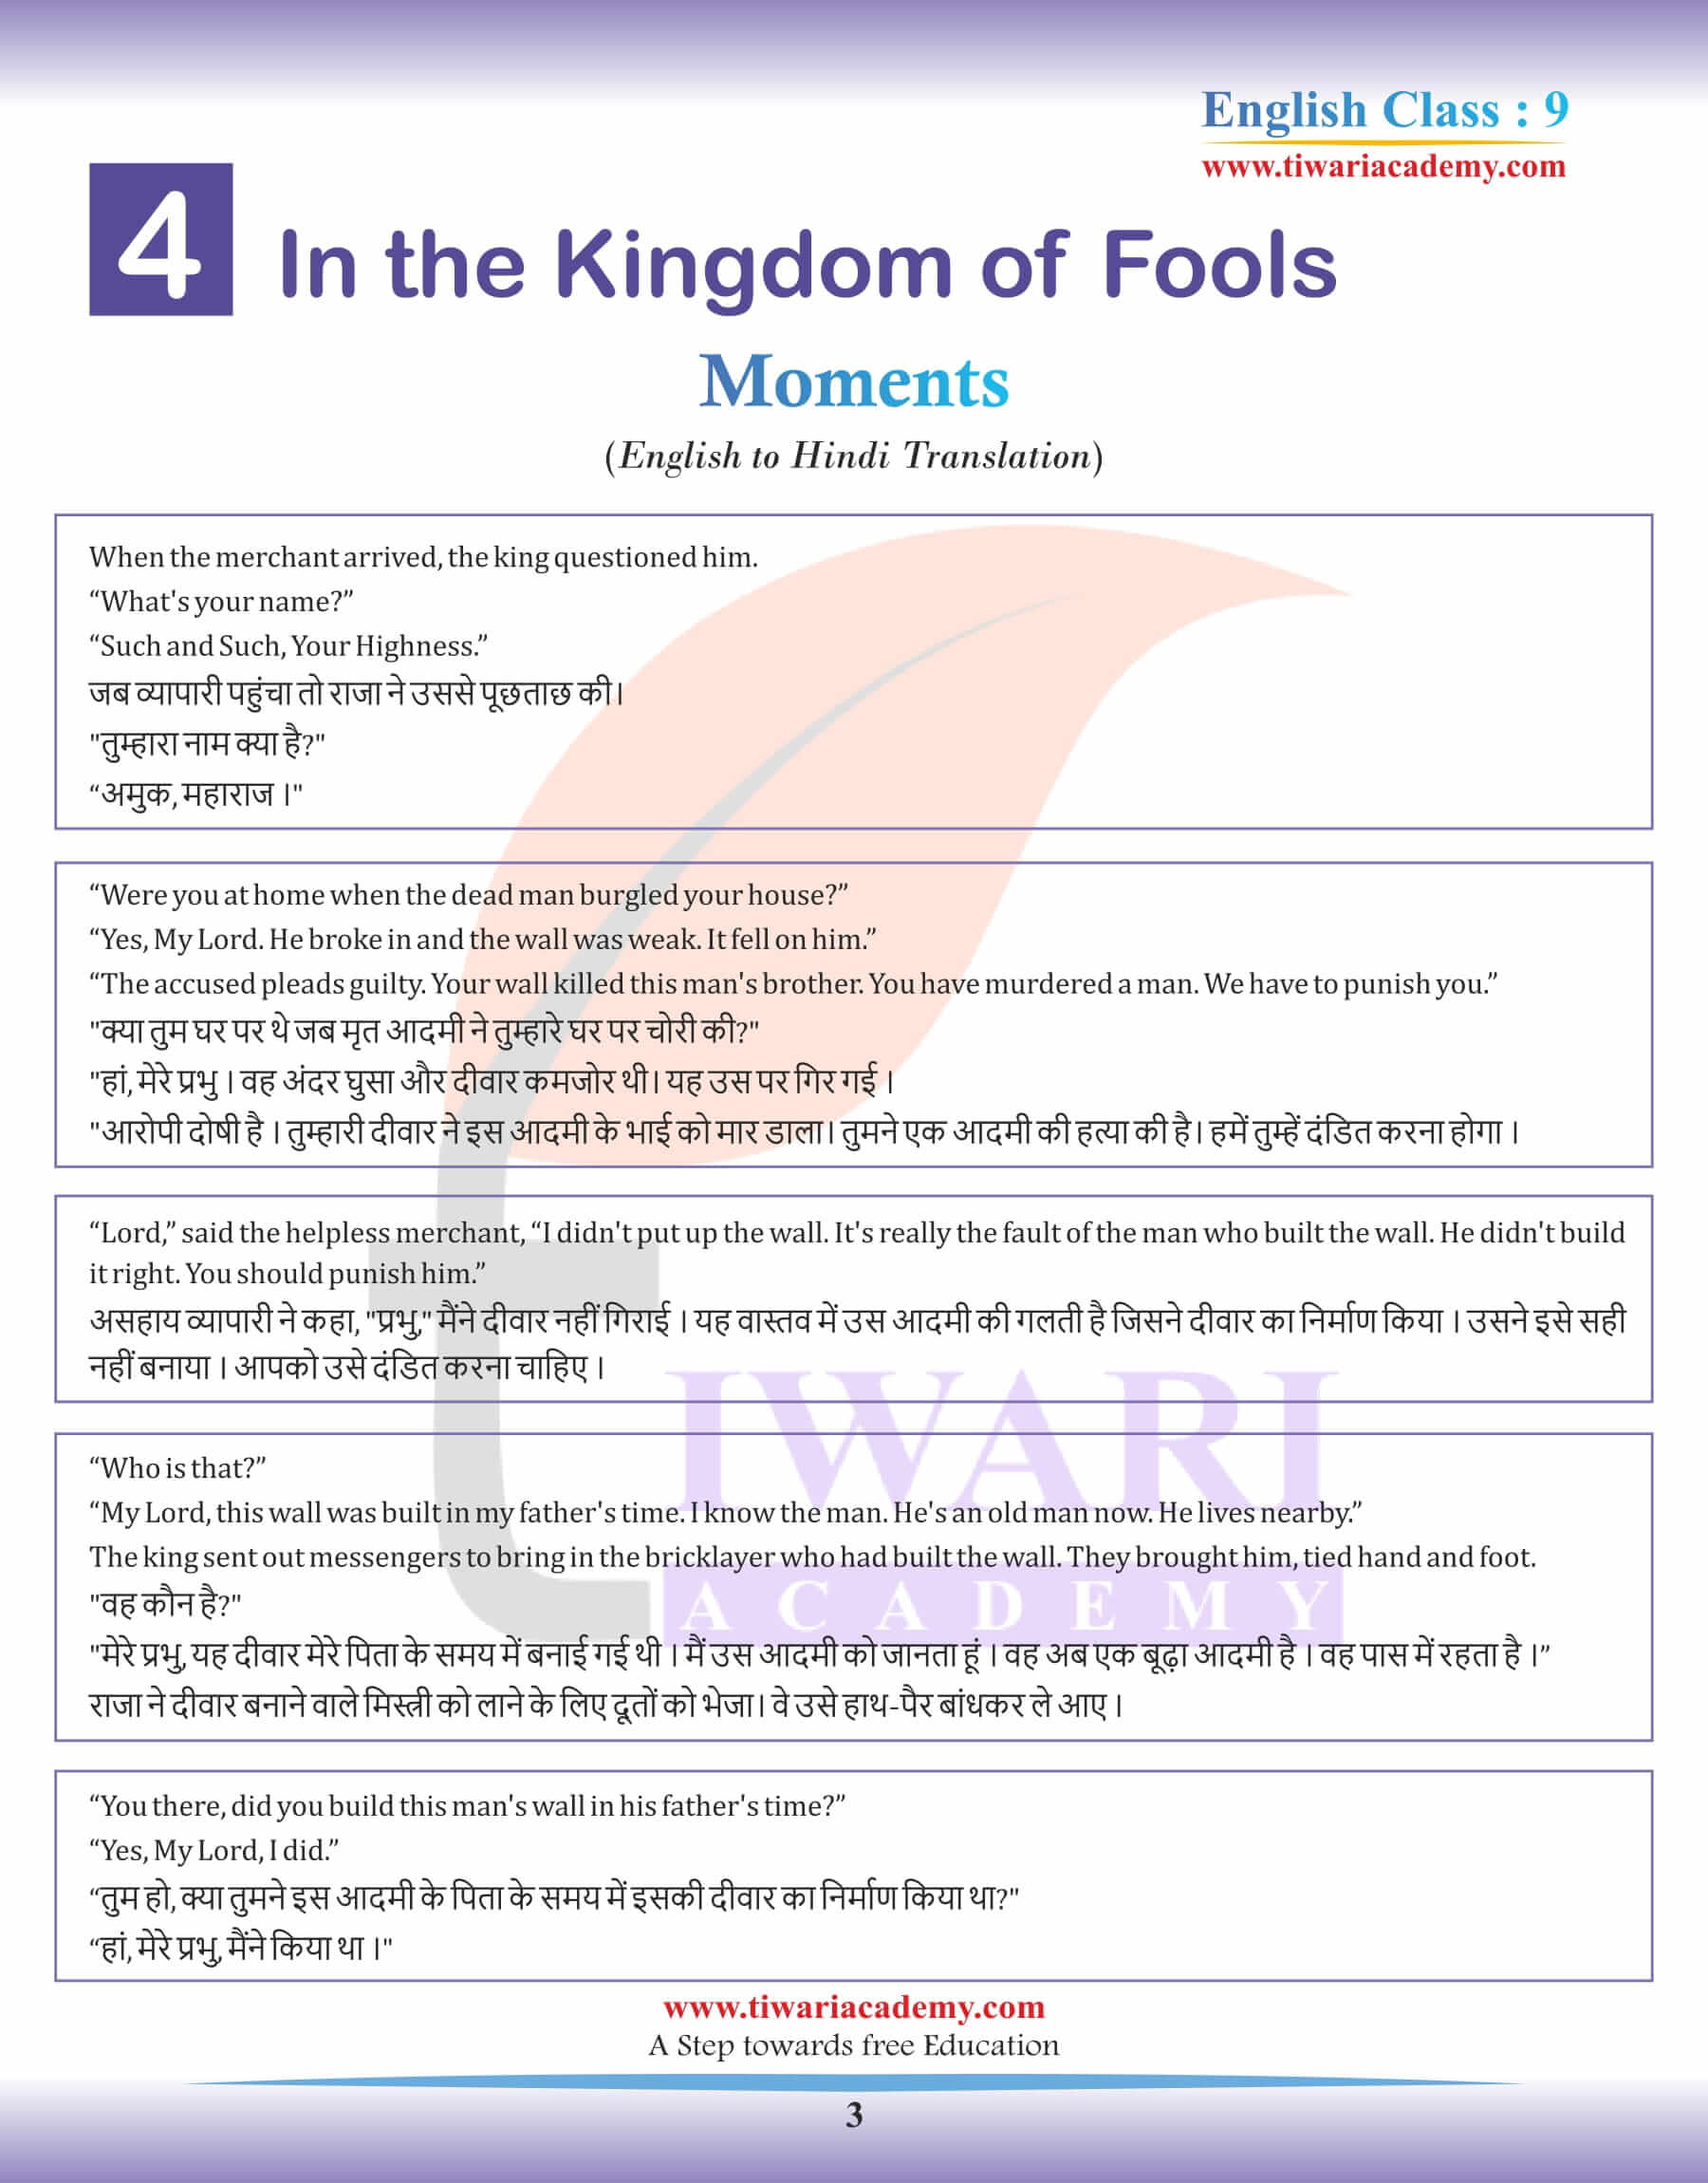 In the Kingdom of Fools